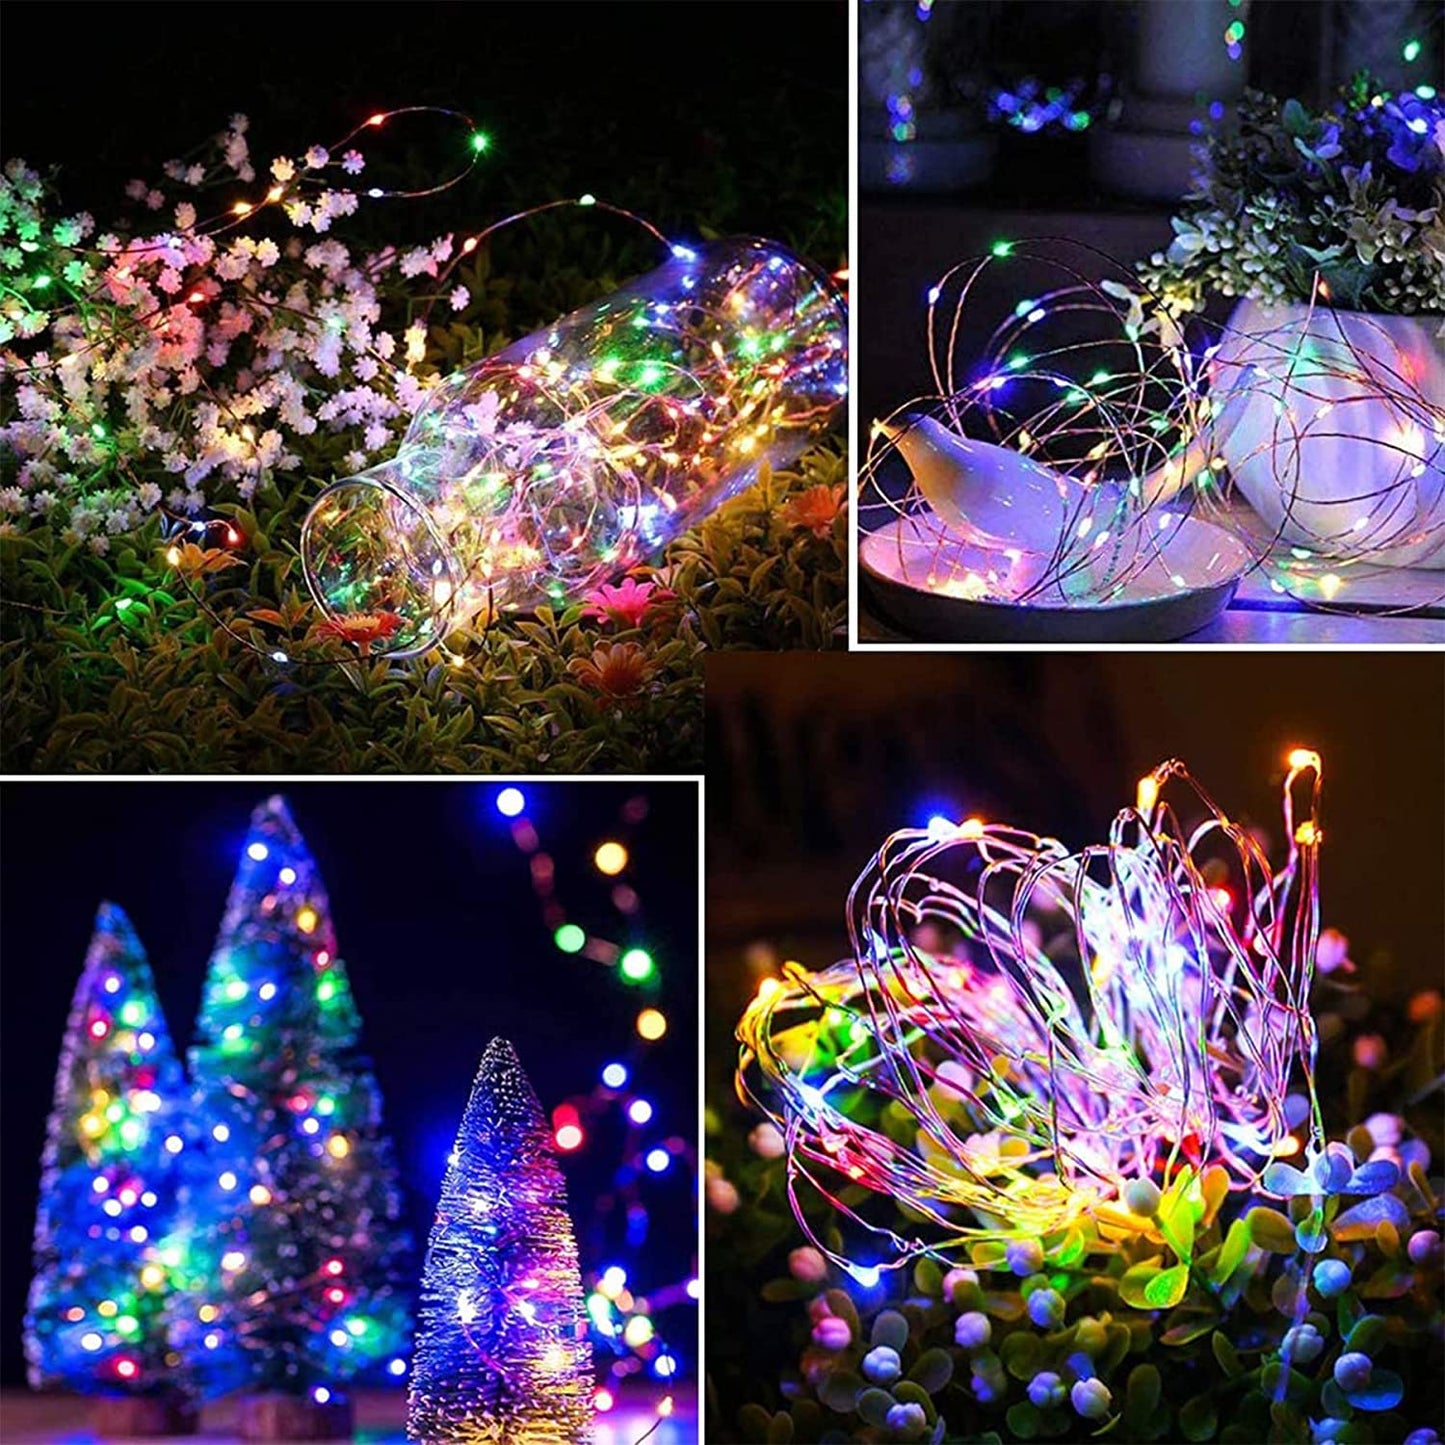 [2 Pack] Solar String Lights Waterproof, 12M/40Ft 120 LED 8 Modes Copper Wire Decorative Solar Fairy Lights for Home, Garden, Patio, Yard, Fence, Camping, Party, Wedding (Multi-Coloured)